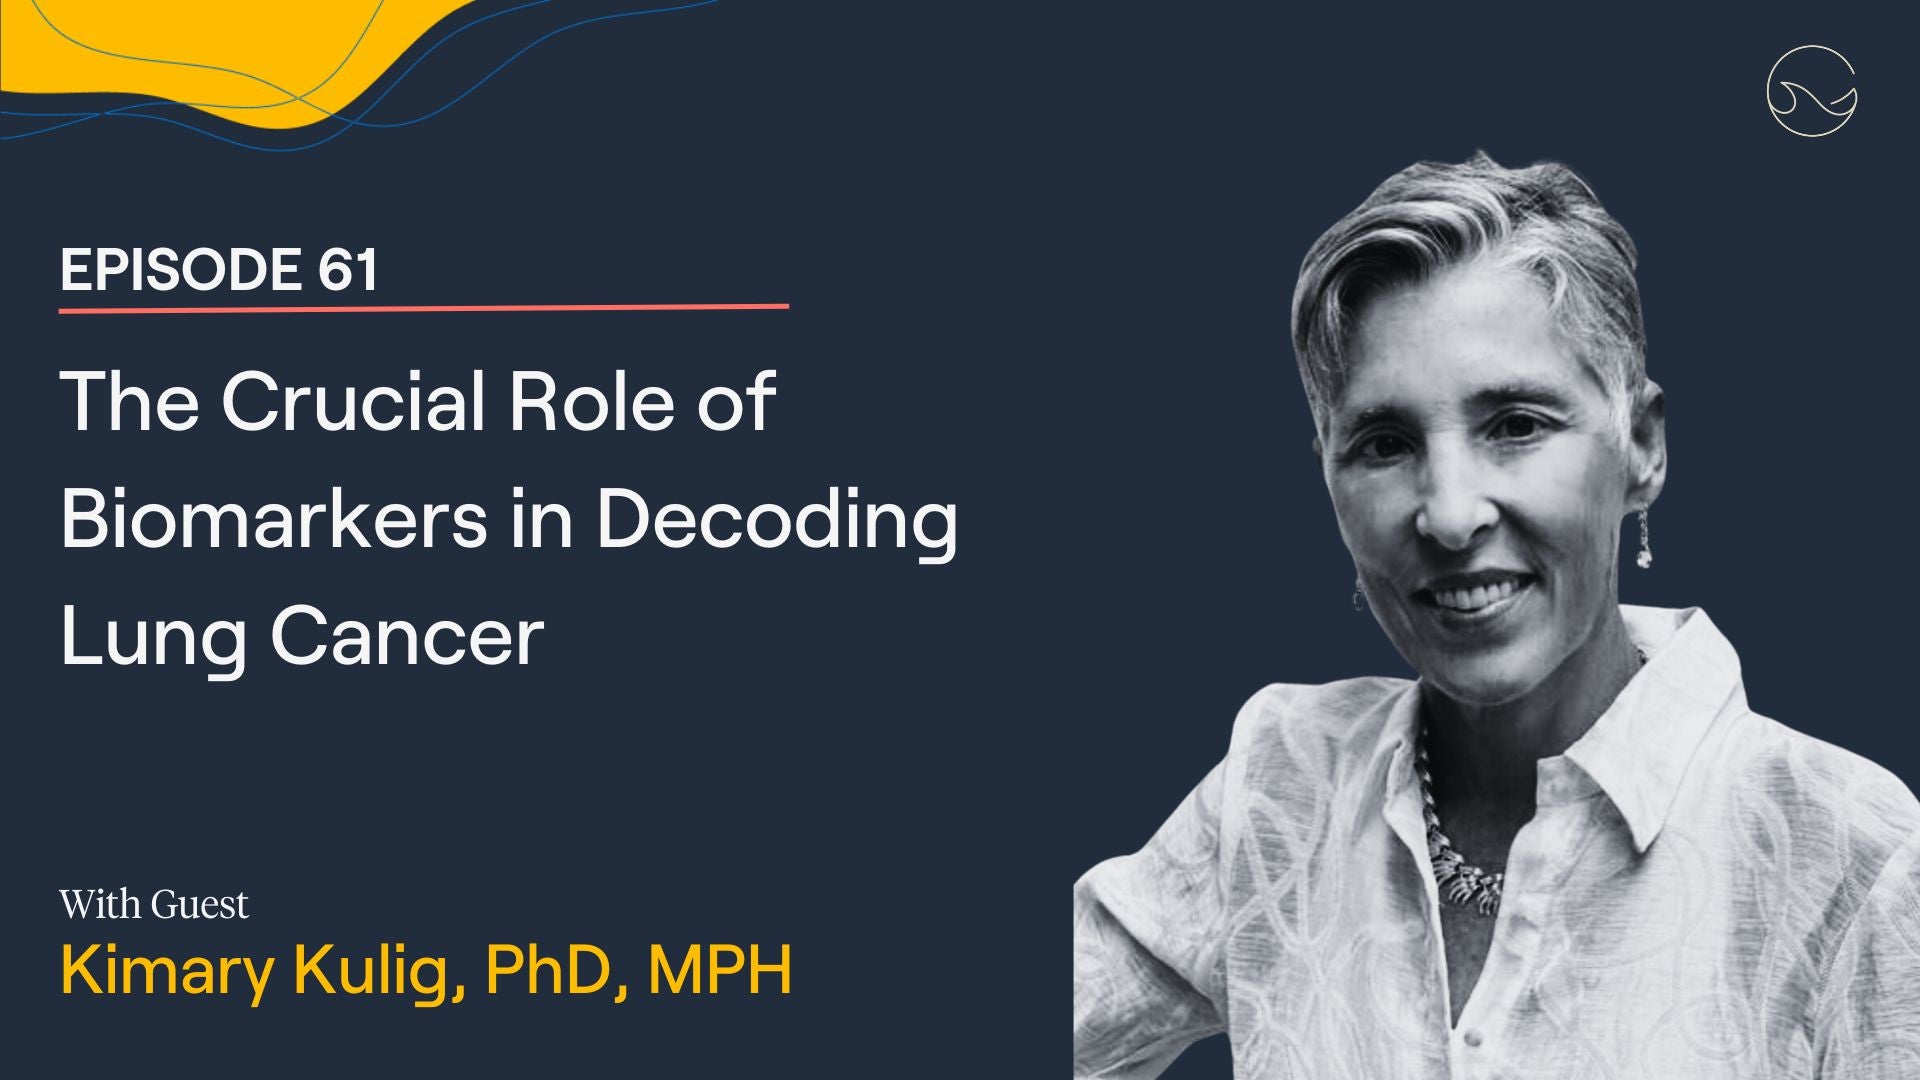 Load video: The latest episode of &quot;The Patient from Hell&quot; features Kimary Kulig who talks about the importance of biomarker testing for lung cancer patients.